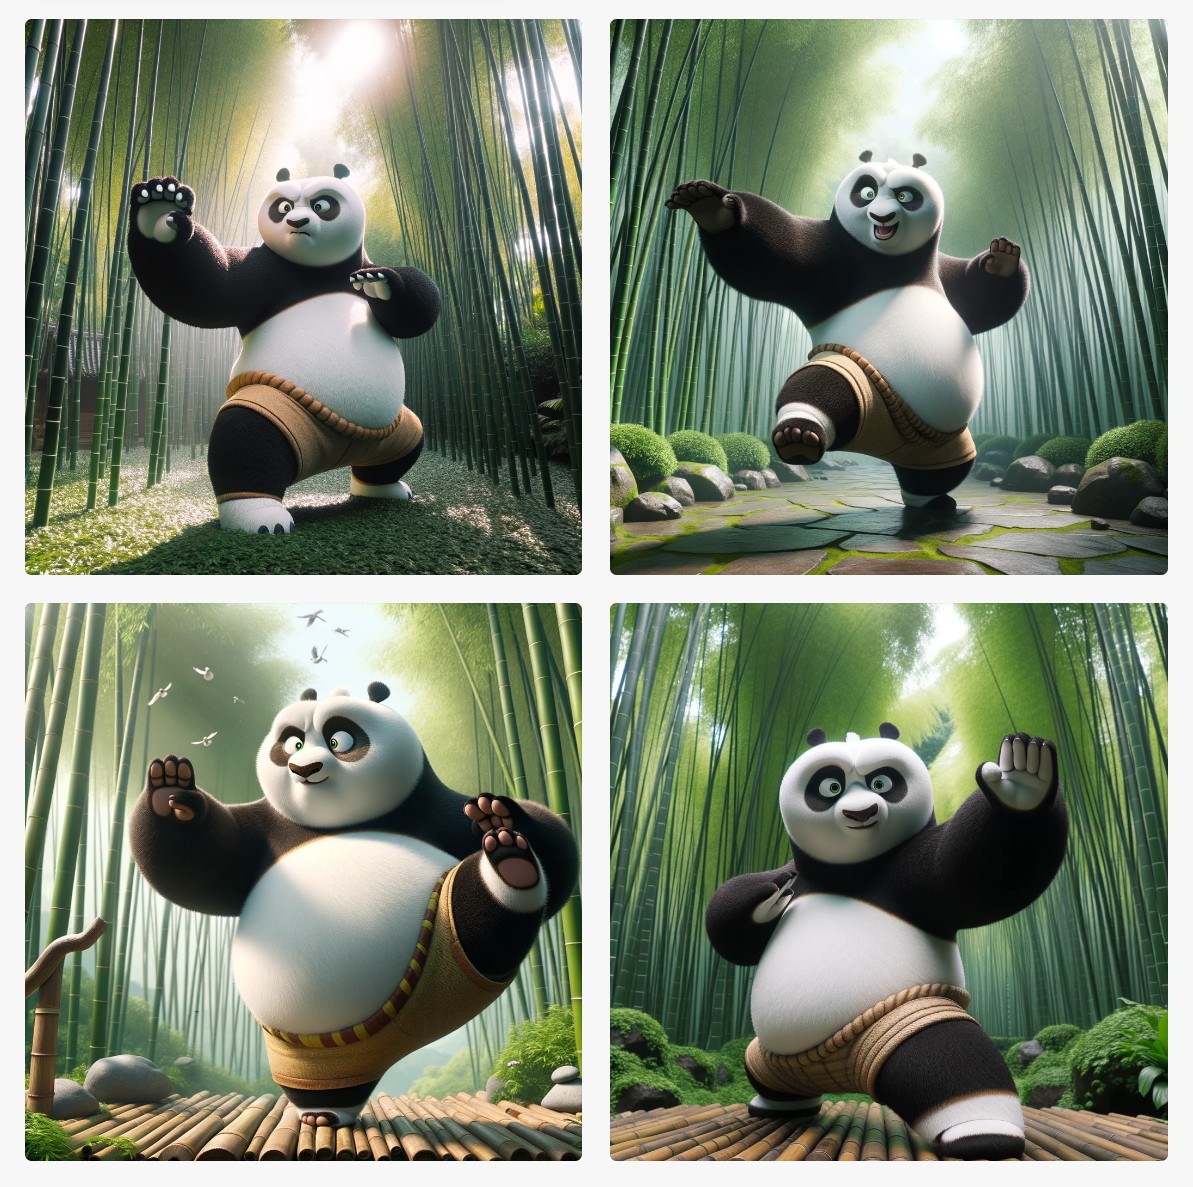 panda 2 practice martial art by dalle 3